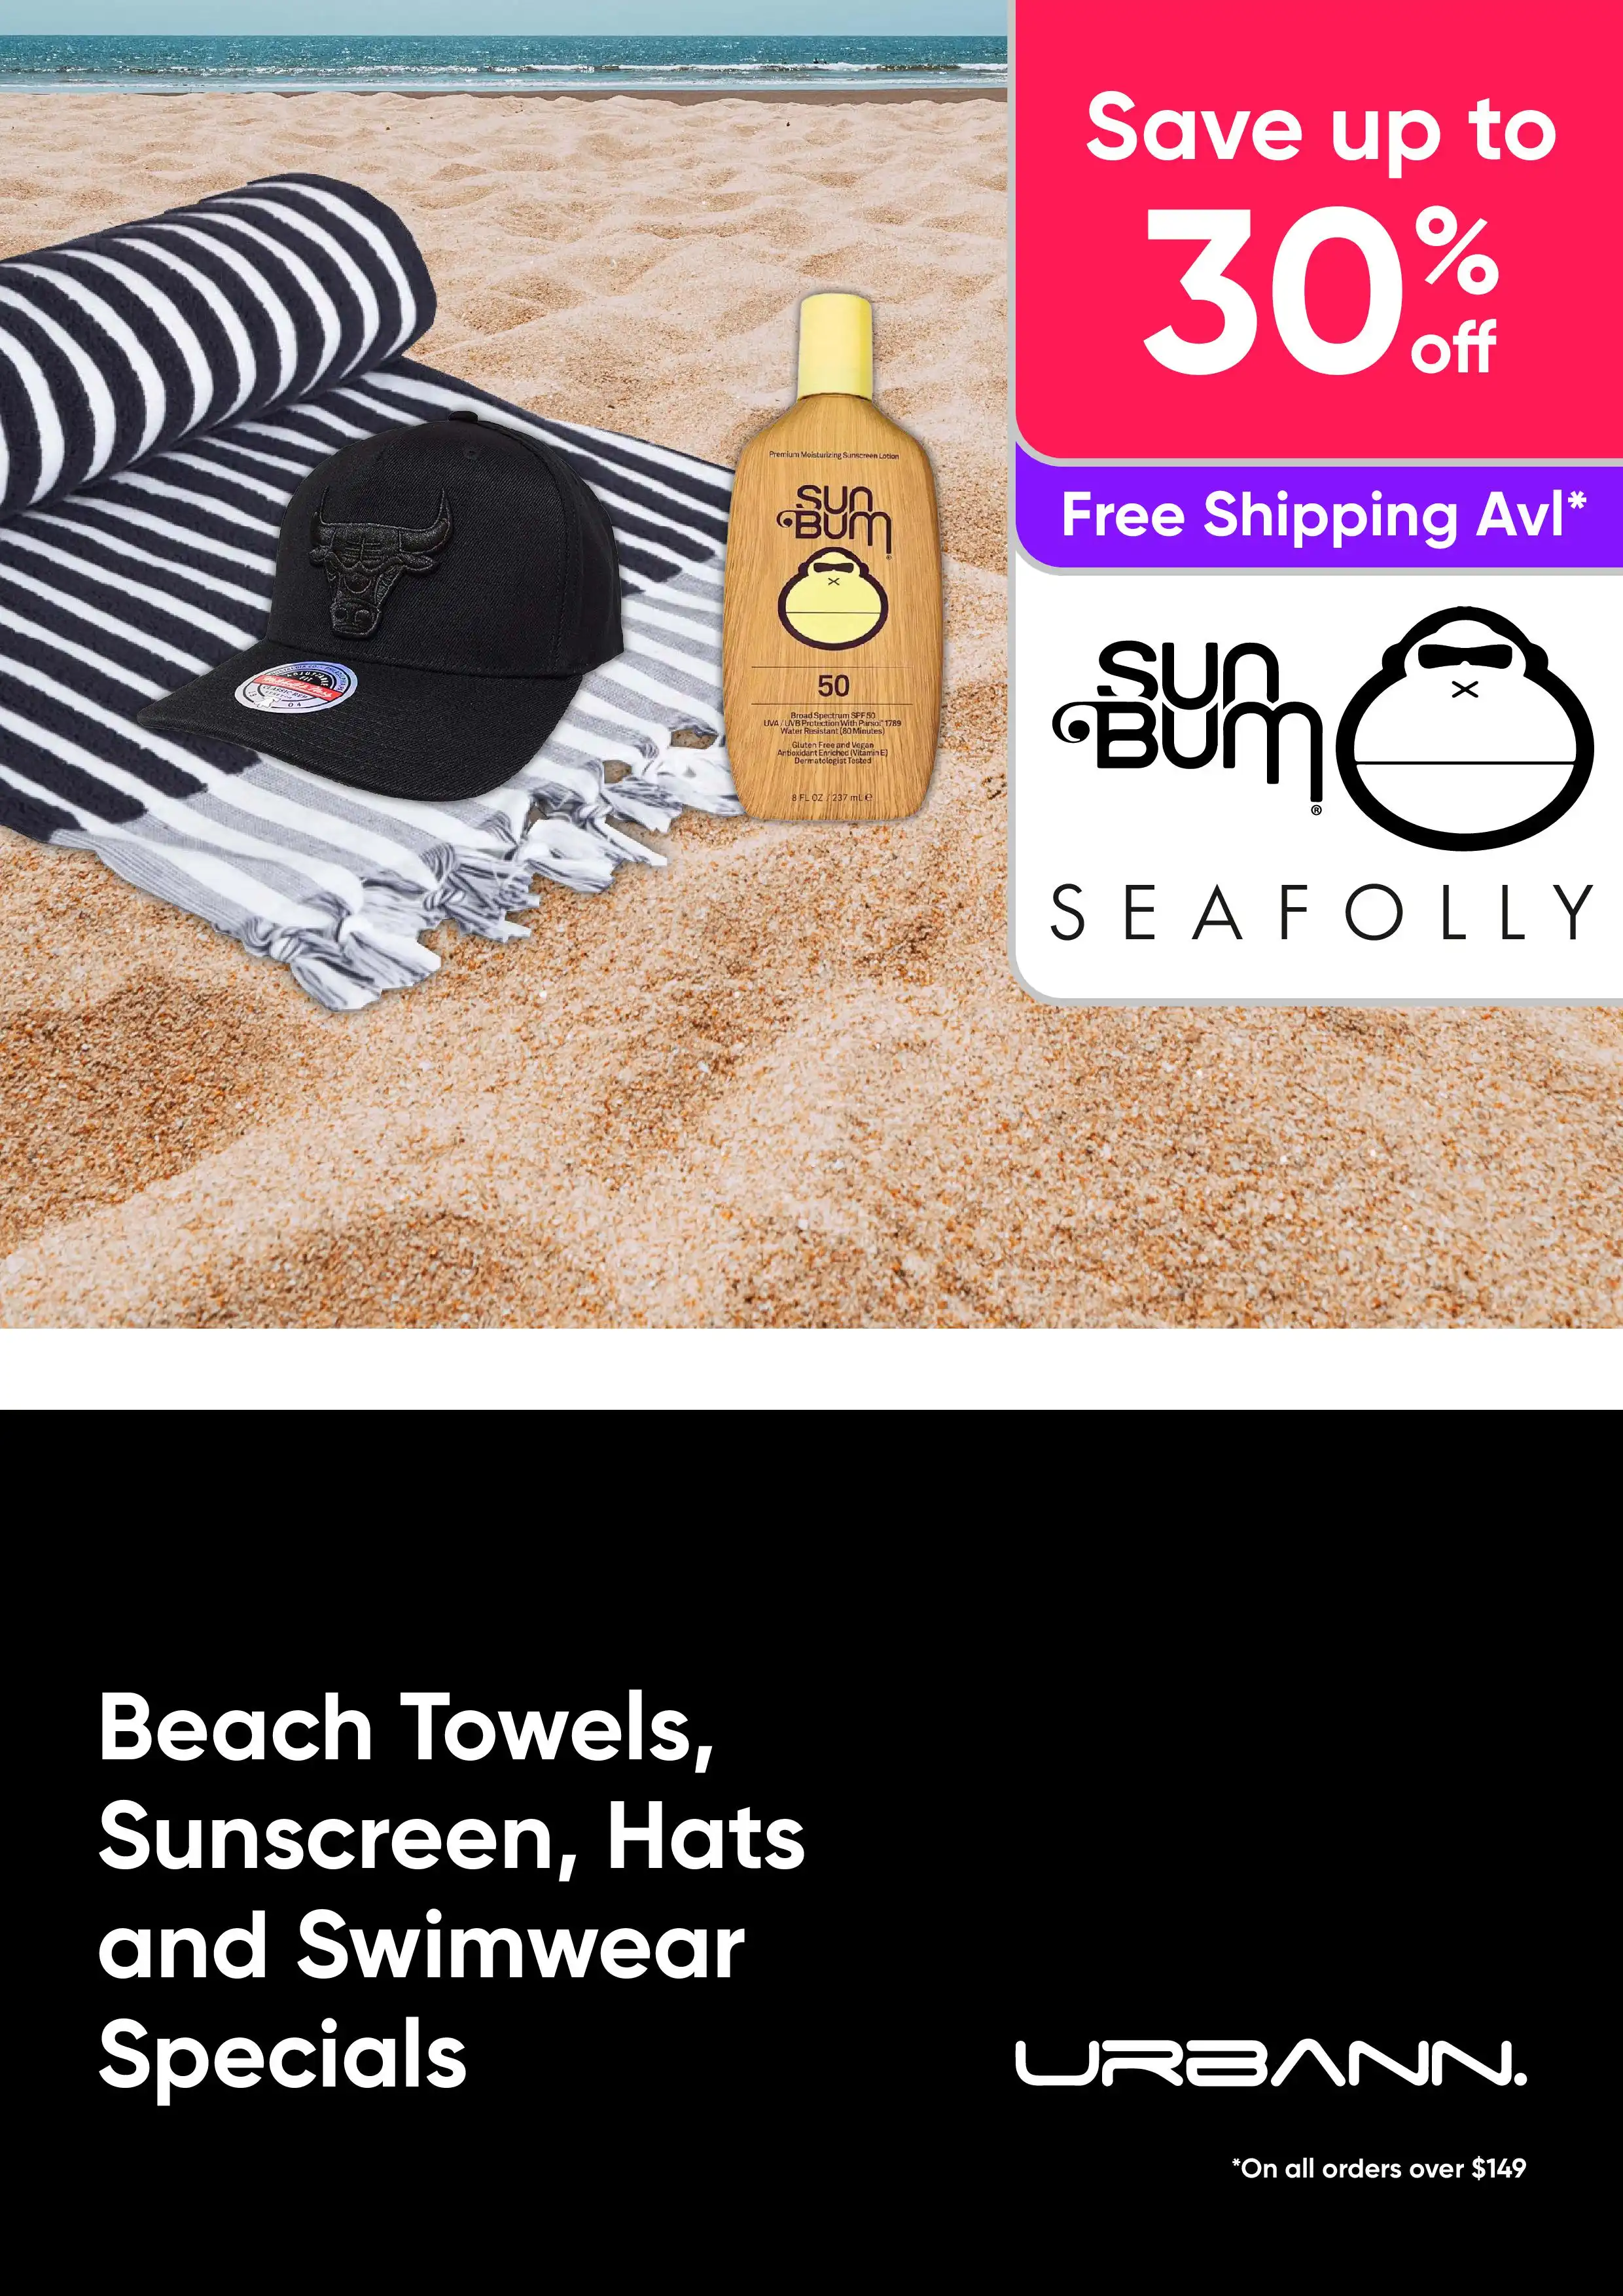 Beach Towels, Sunscreen, Hats and Swimwear Specials - Save Up to 30% Off RRP